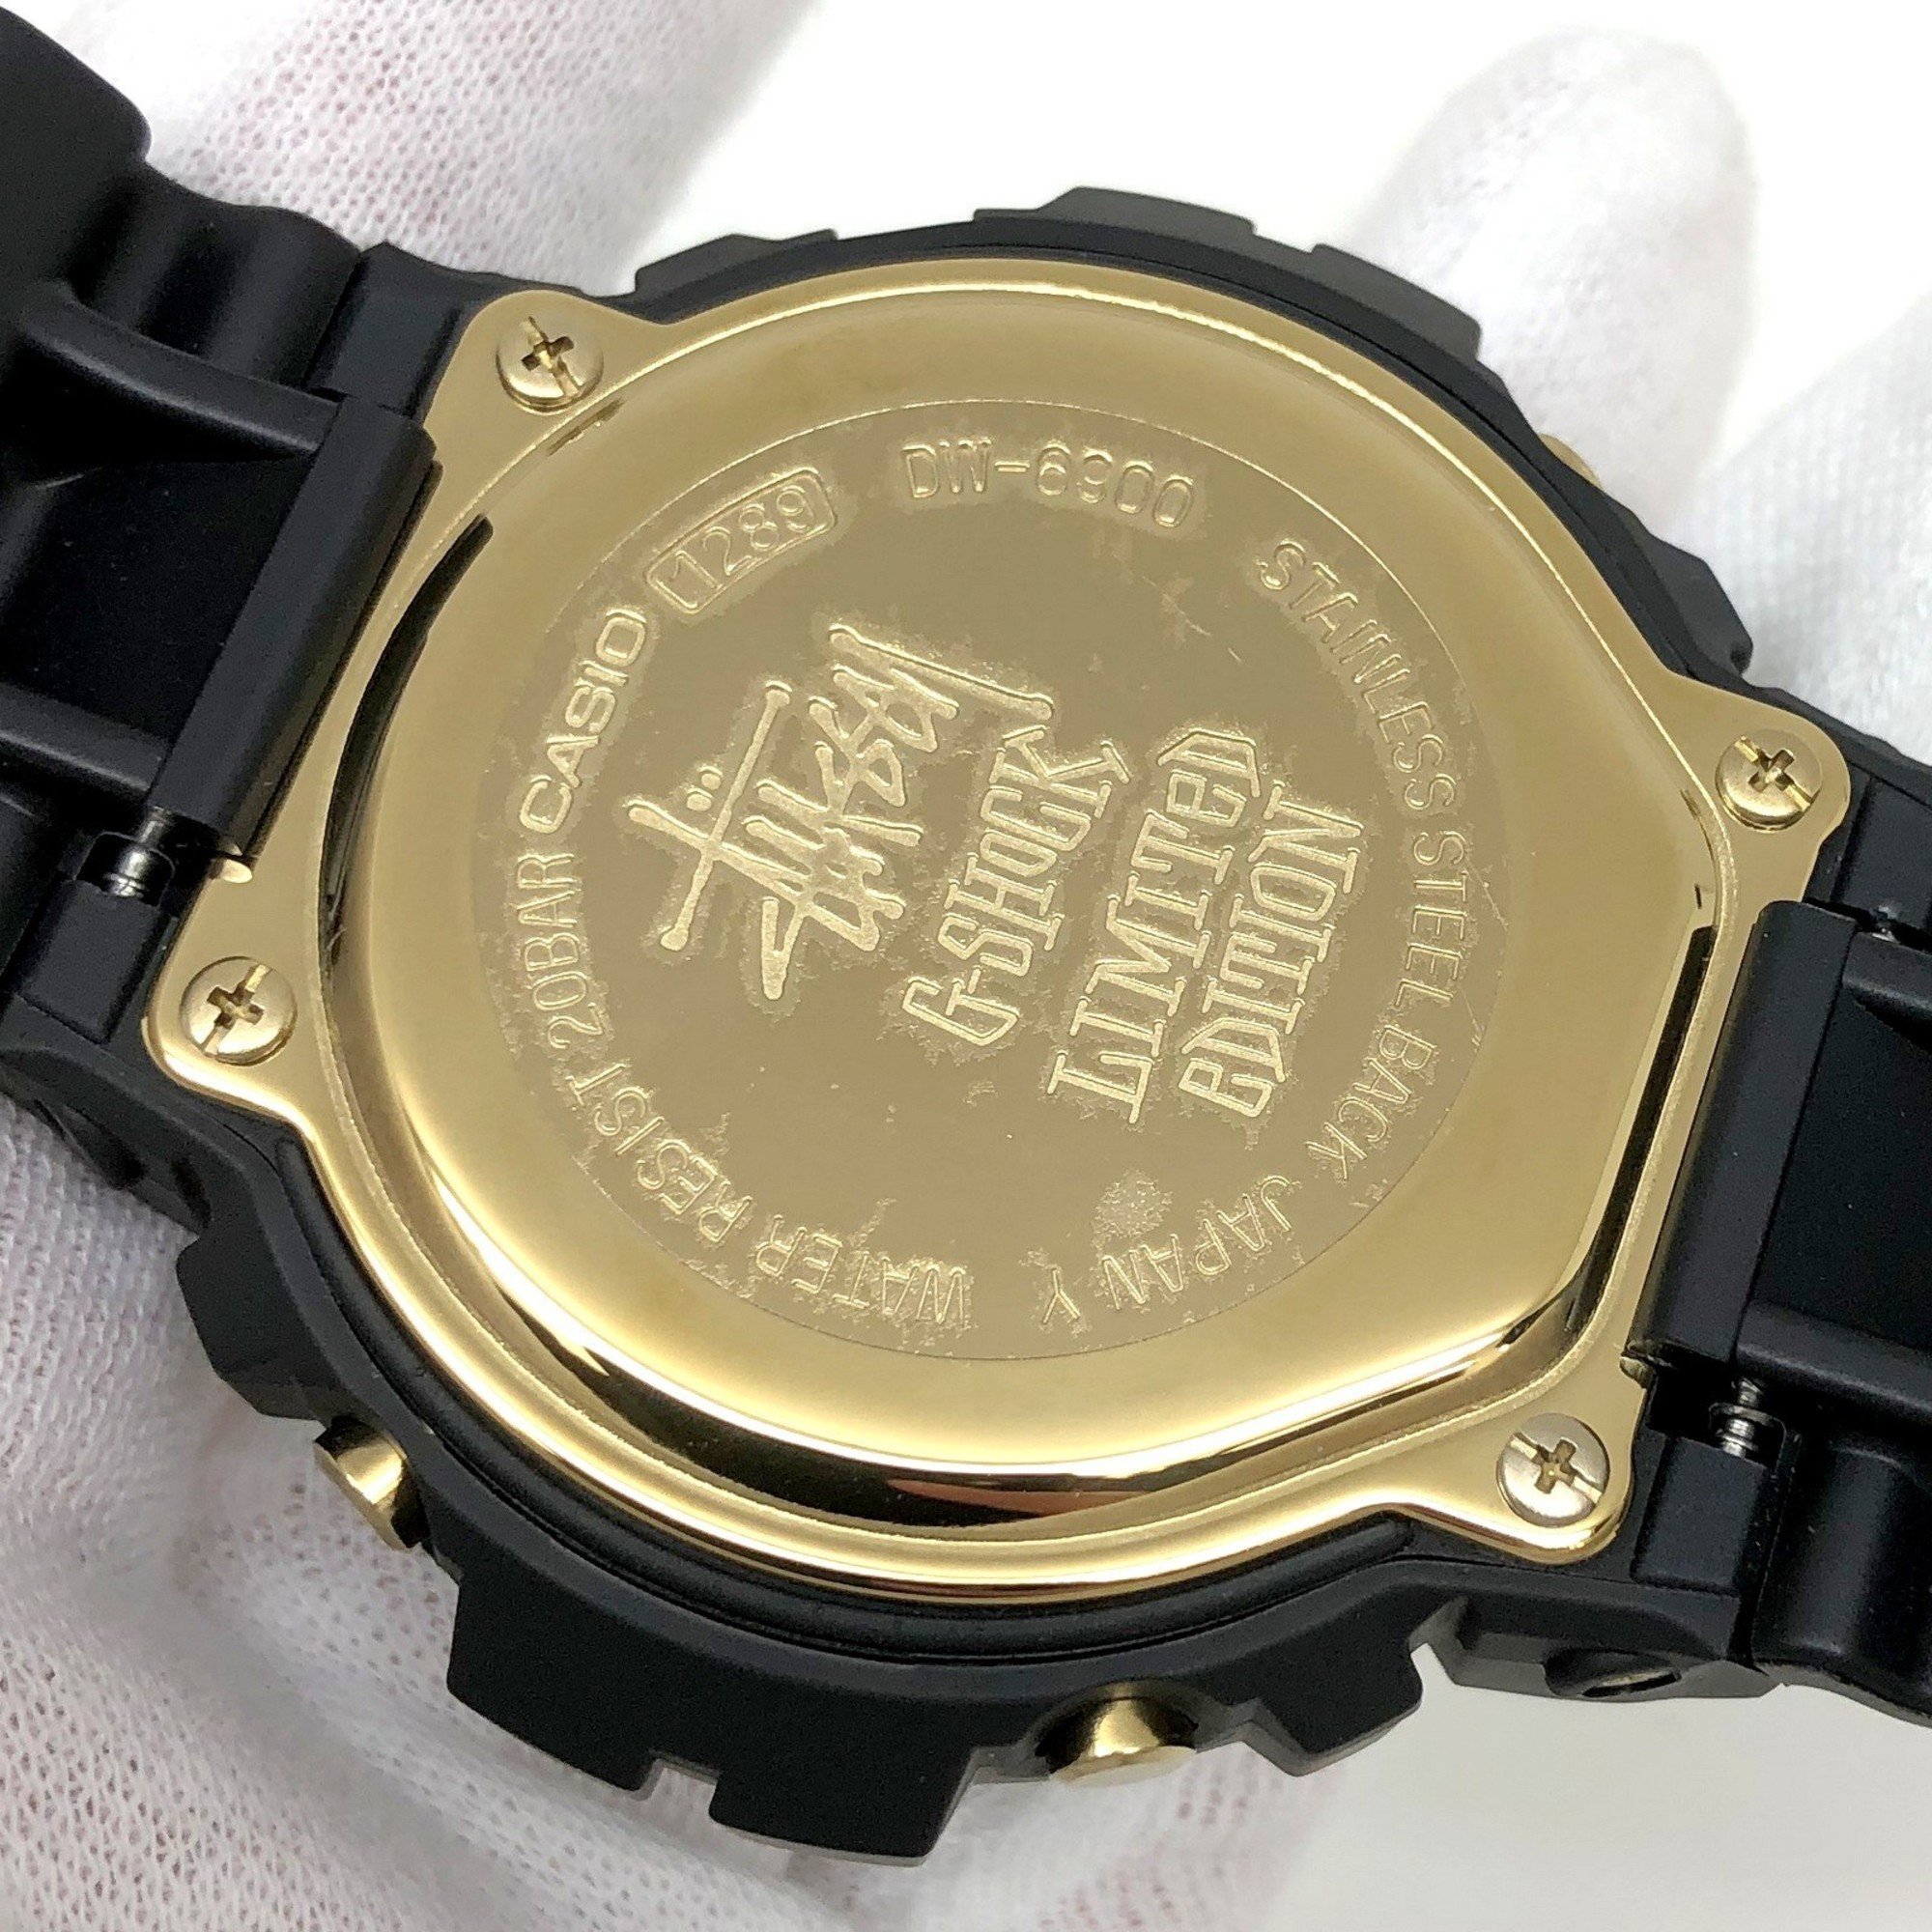 CASIO Casio G-SHOCK Watch DW-6900STS-9JR STUSSY 25th Anniversary Model 25TH ANNIVERSARY Third Double Name Collaboration Men's Black Gold IT4XYOUHN686